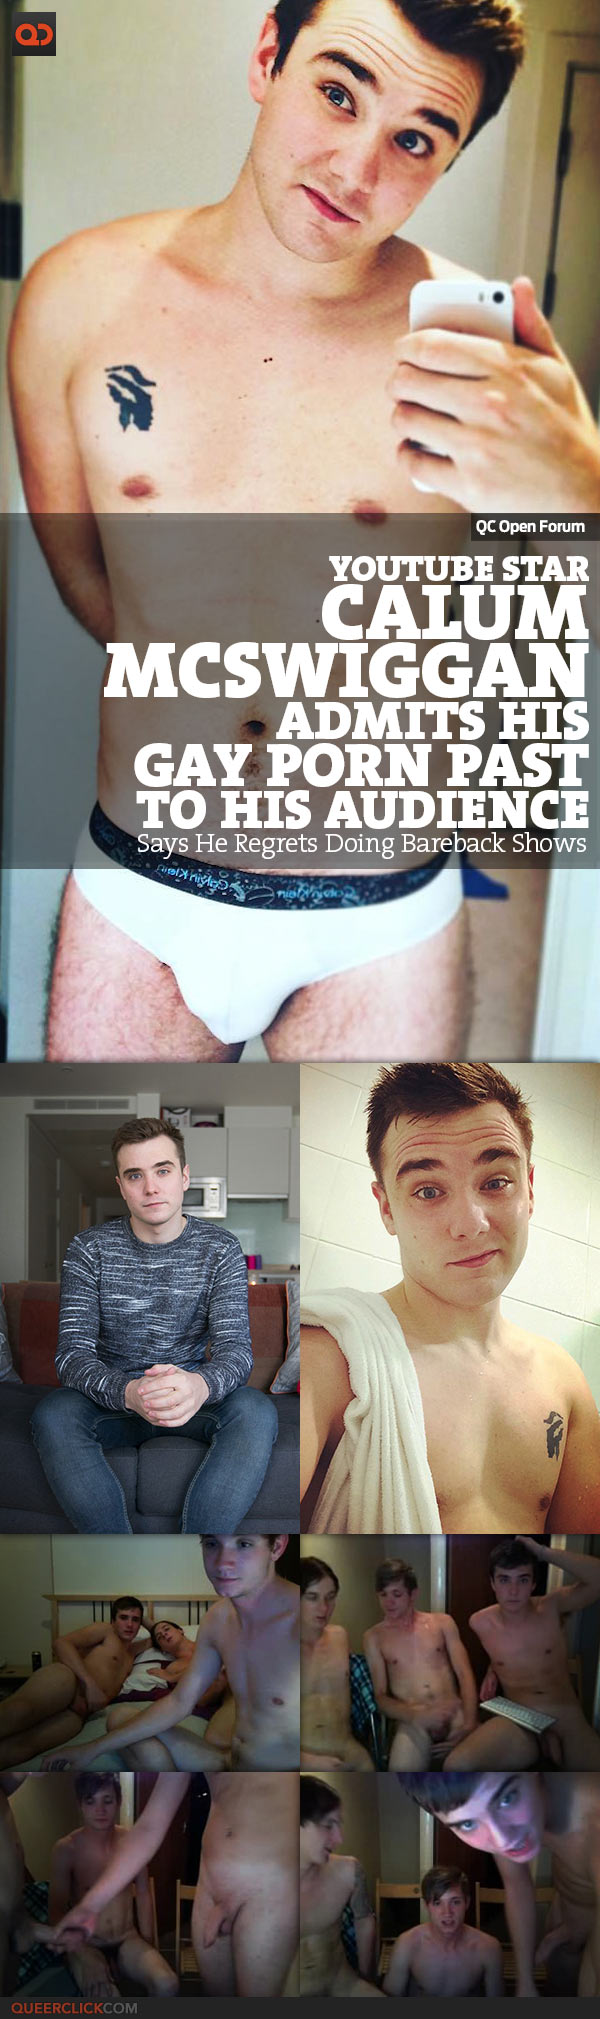 600px x 2019px - QC Open Forum: YouTube Star Calum McSwiggan Admits His Gay Porn Past To His  Audience, Says He Regrets Doing Bareback Shows - QueerClick